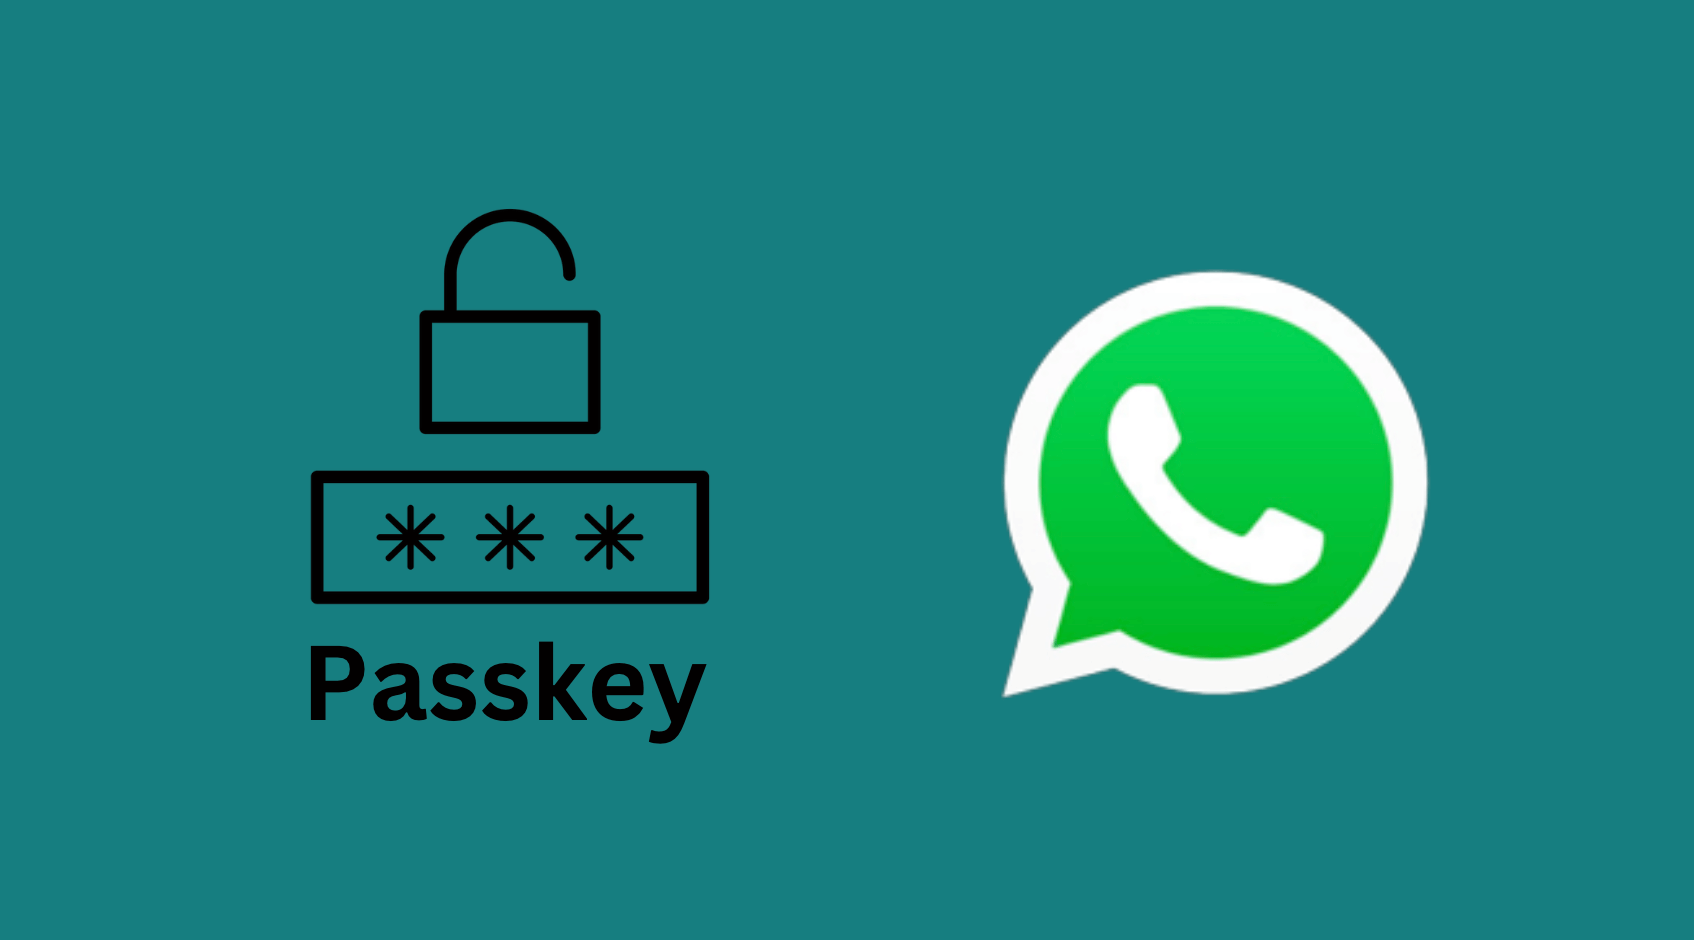 WhatsApp Introduces Passkey Support On Android